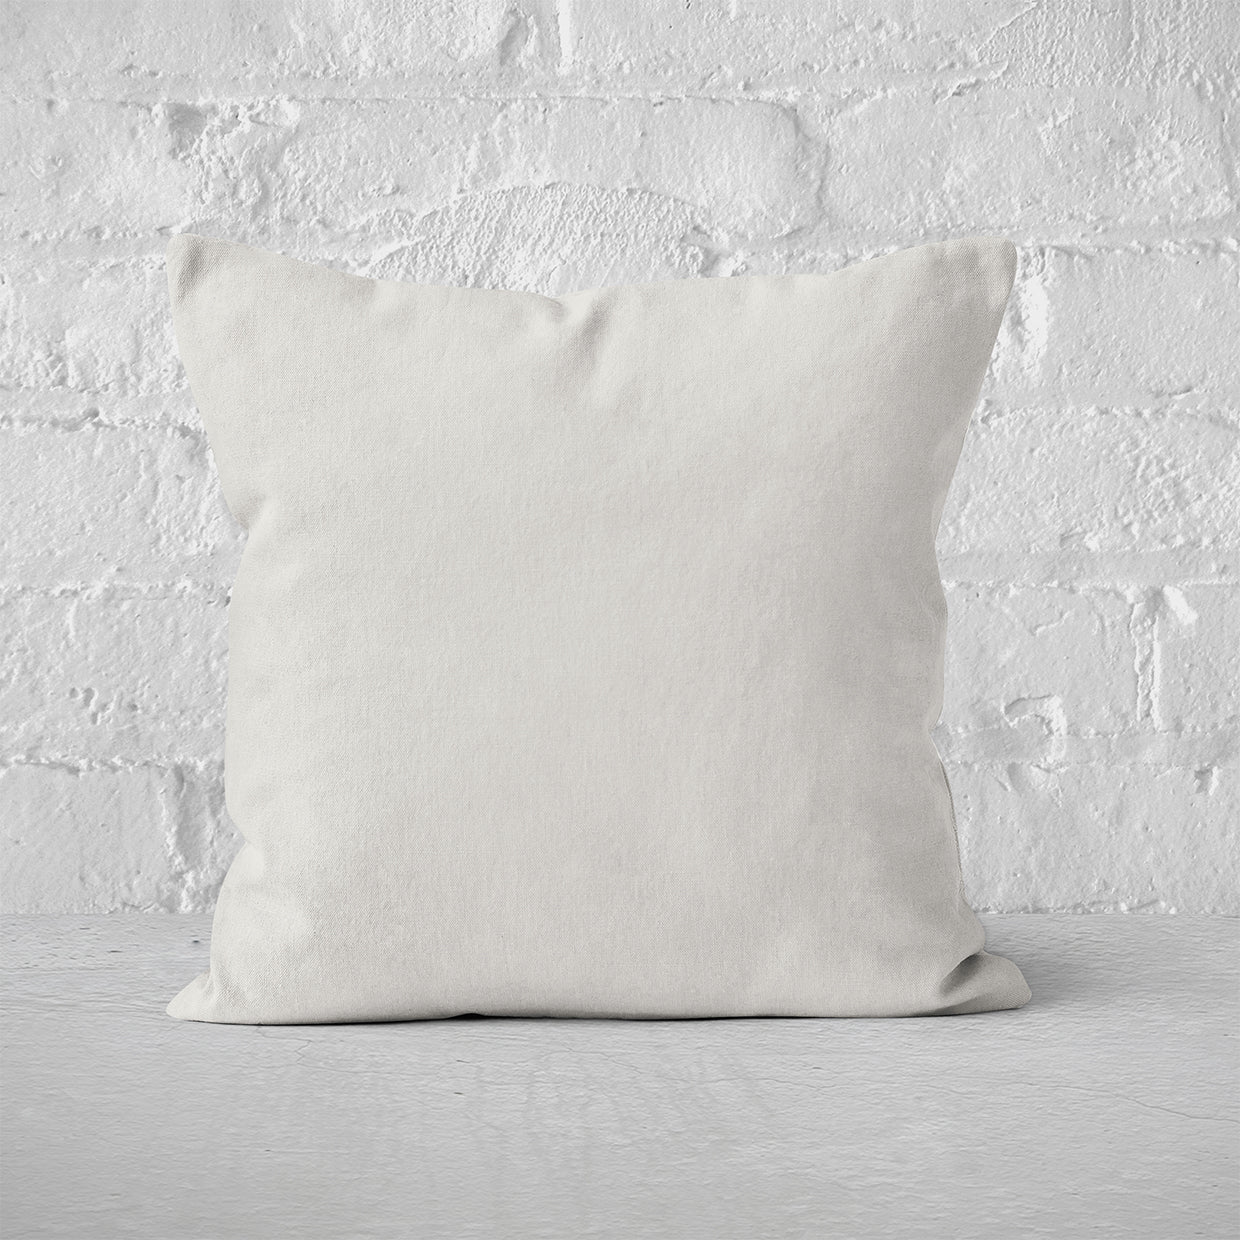 Pillow Cover Art Feature 'Solid' - Light Grey - Cotton Twill